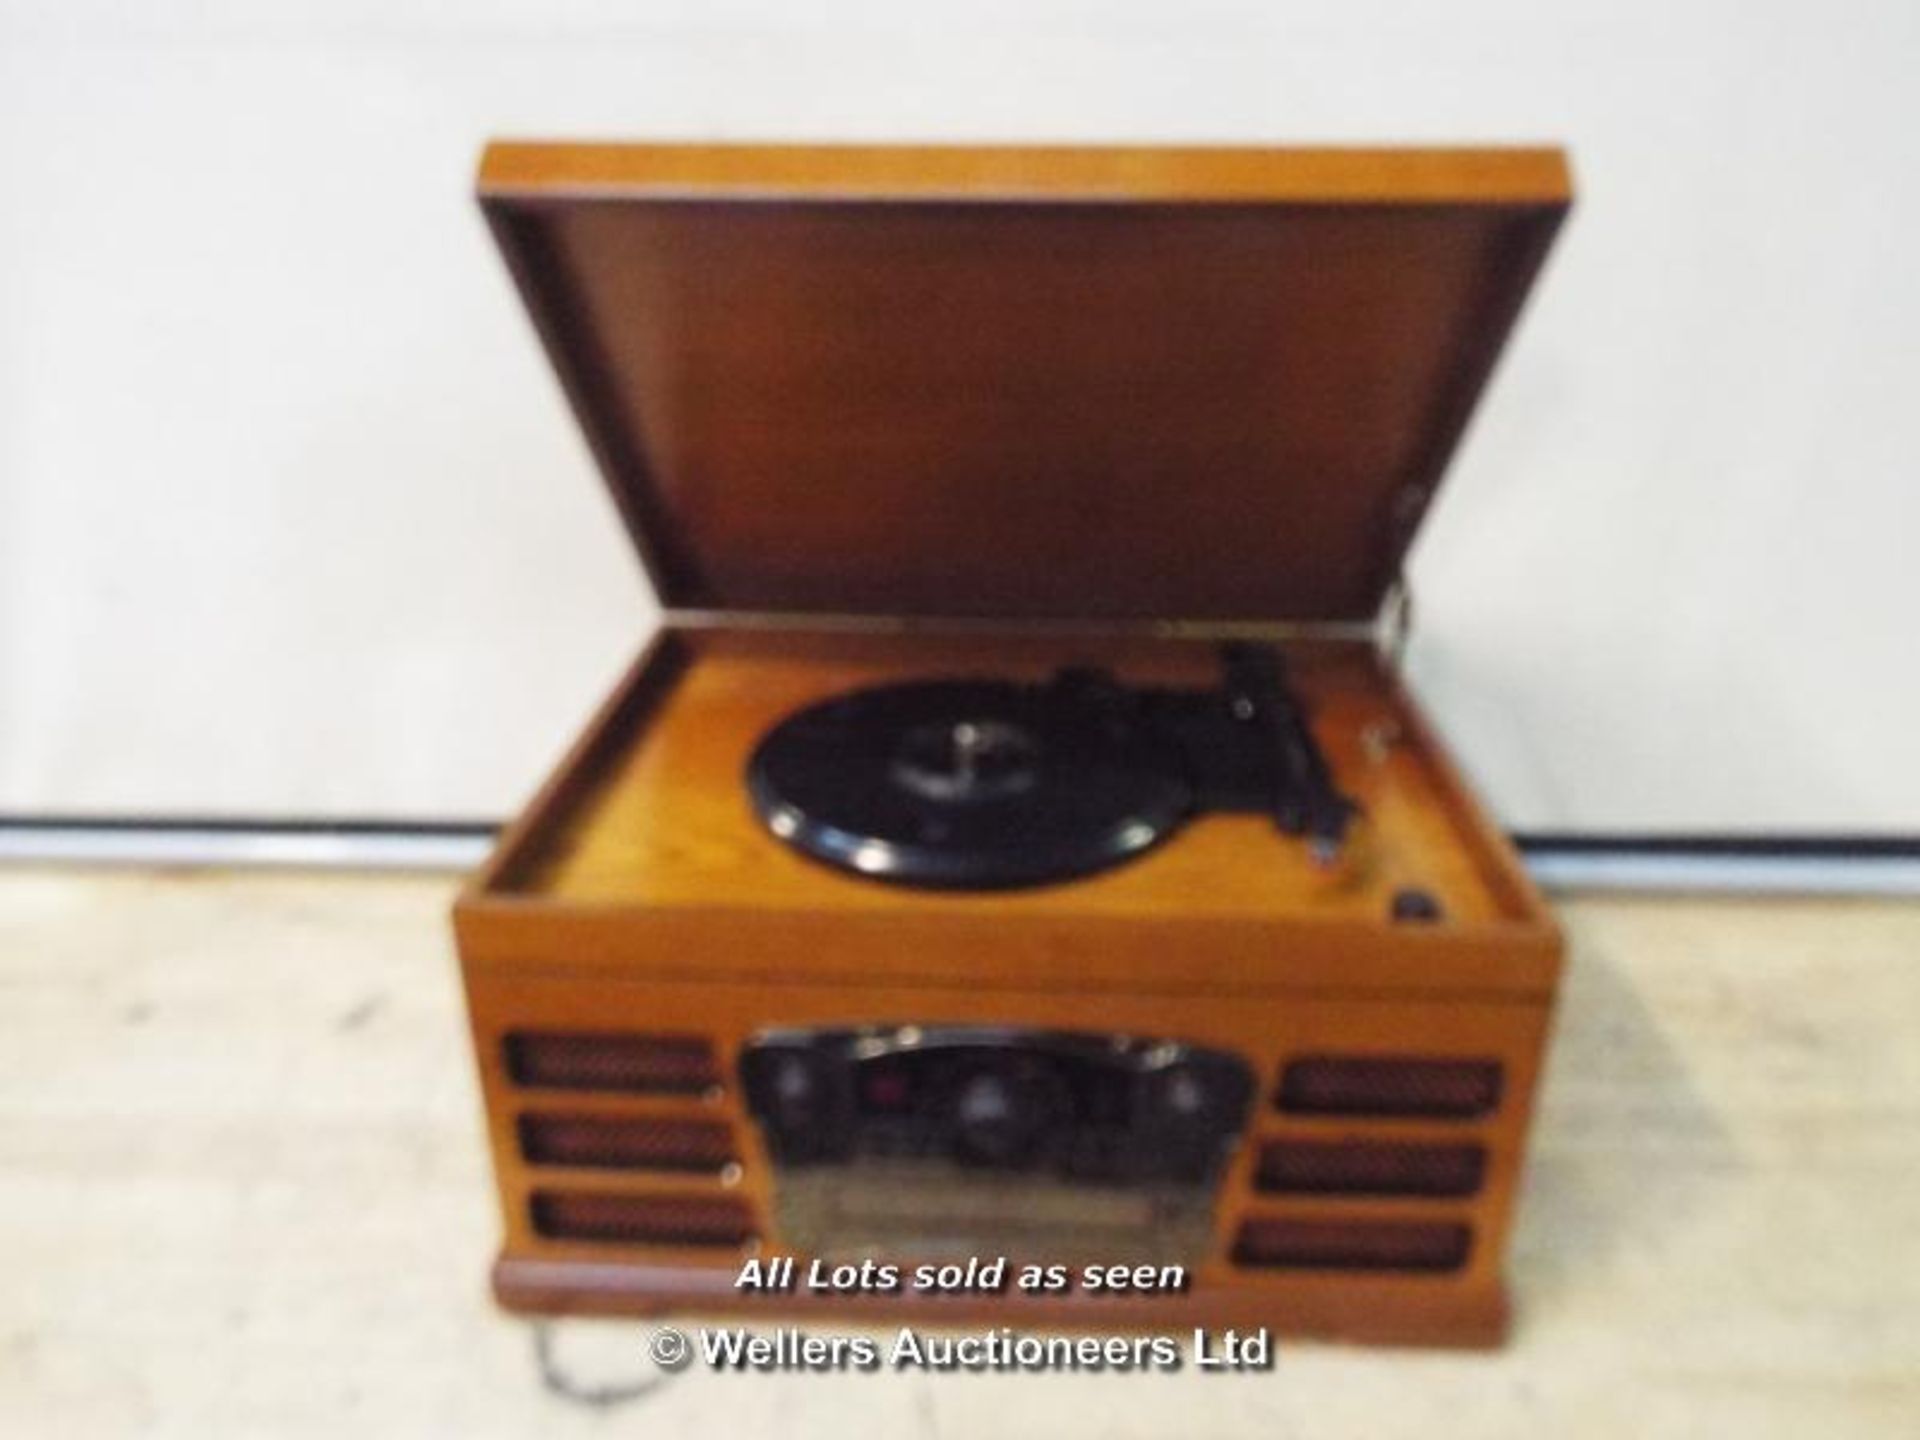 WOODEN RETRO TURNTABLE WITH BUILT IN CD PLAYER FM RADIO AND USB SD CARD READER  / GRADE: RETURNS /